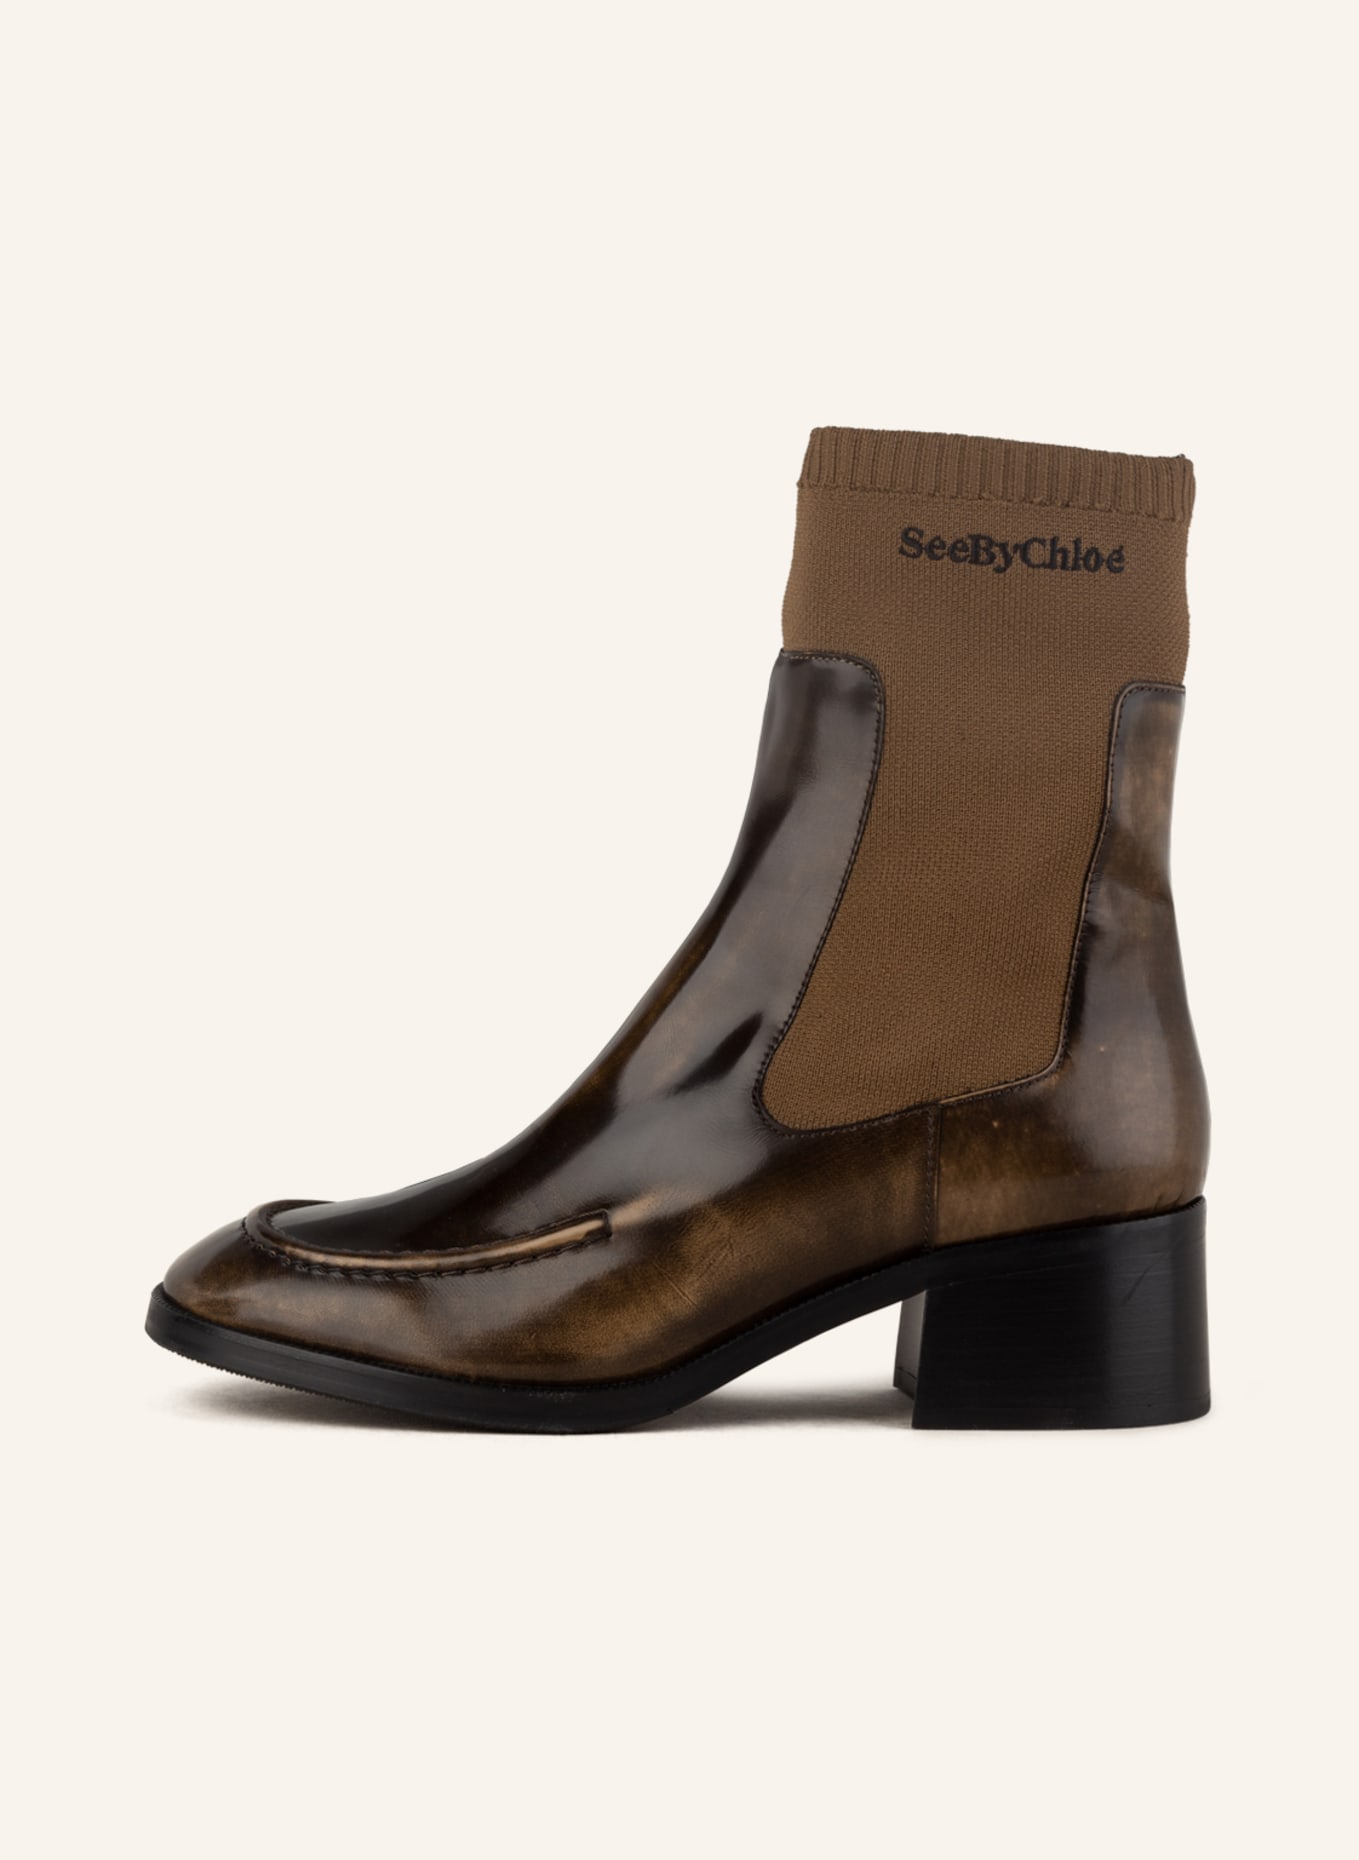 SEE BY CHLOÉ  boots WENDY, Color: 110/415 Olive (Image 4)